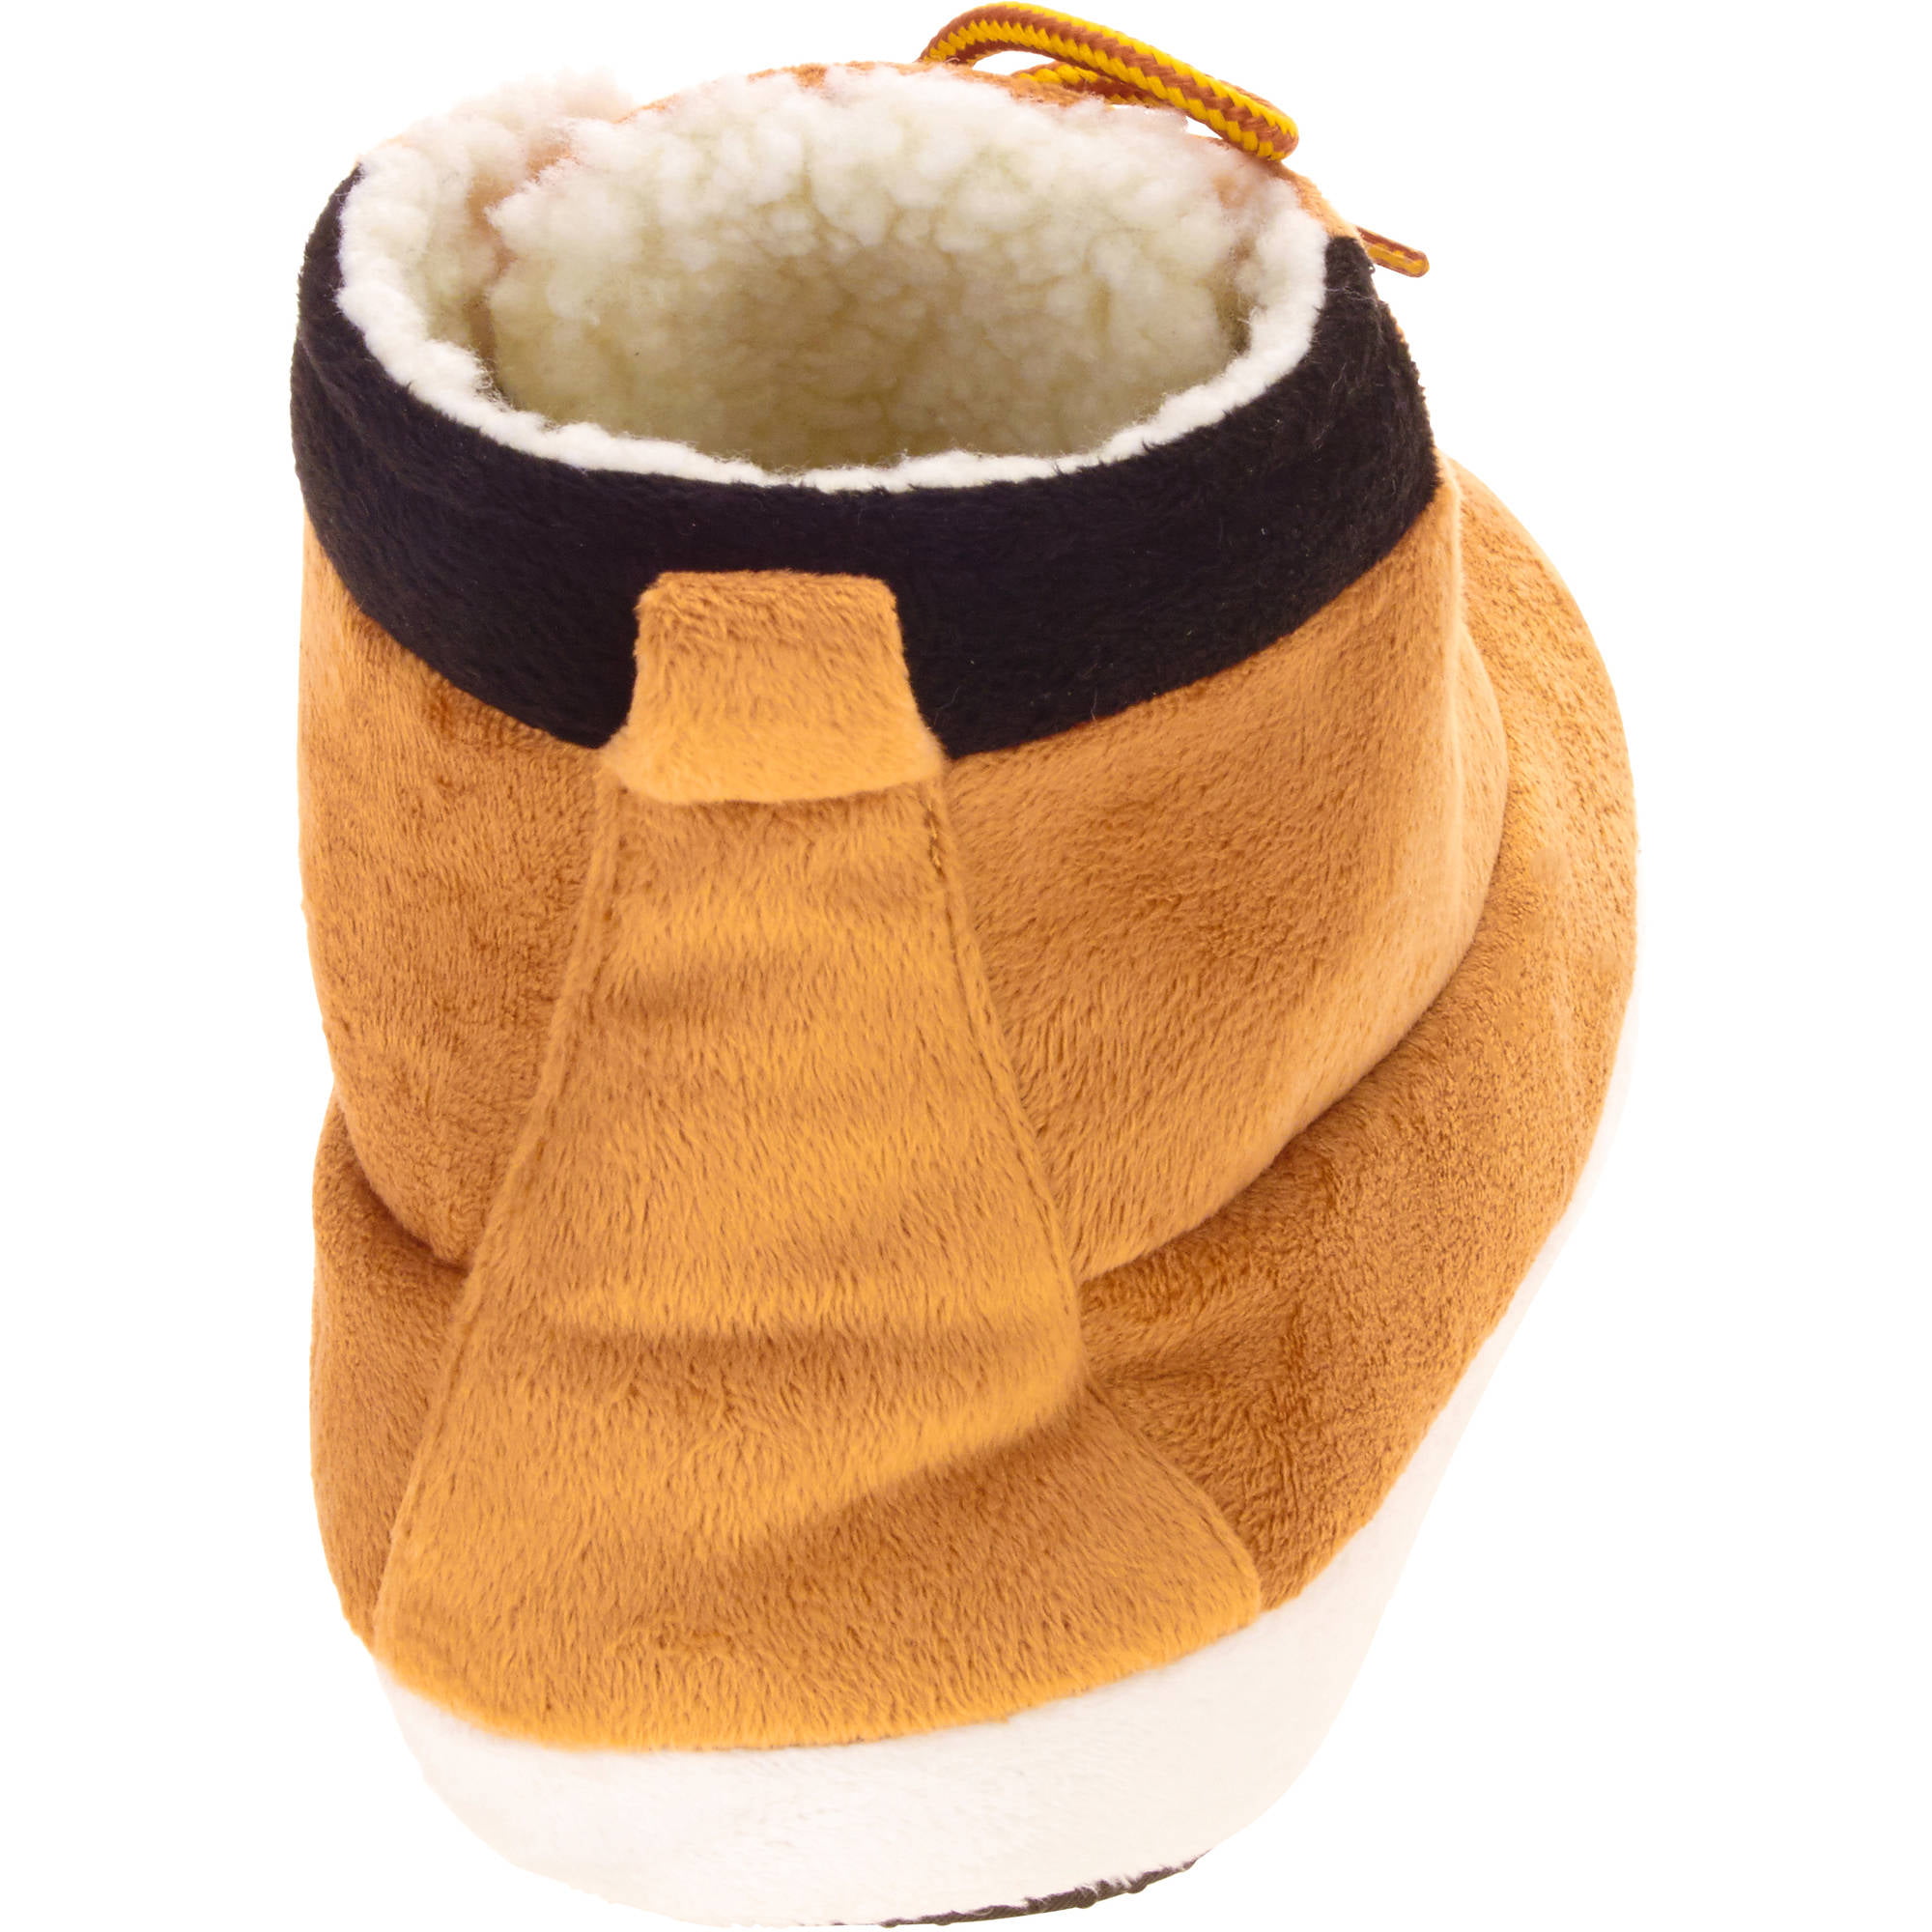 timberland house slippers